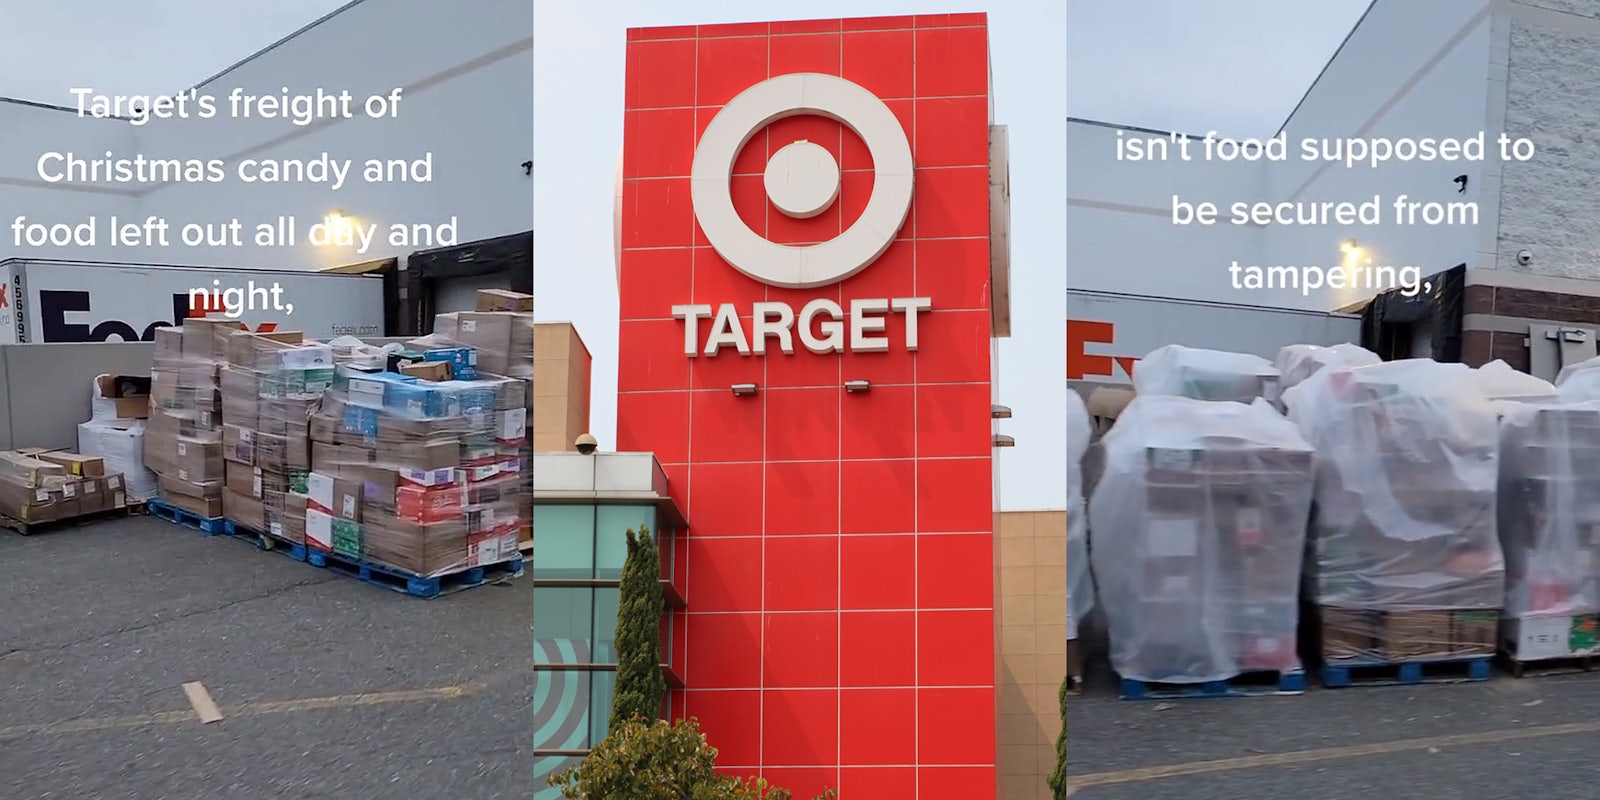 Target exterior with shipment of food outside caption 'Target's freight of Christmas Candy and food left out all day, and night,' (l) Target sign on building (c) Target exterior with shipment of food outside caption 'isn't food supposed to be secured from tampering,' (r)